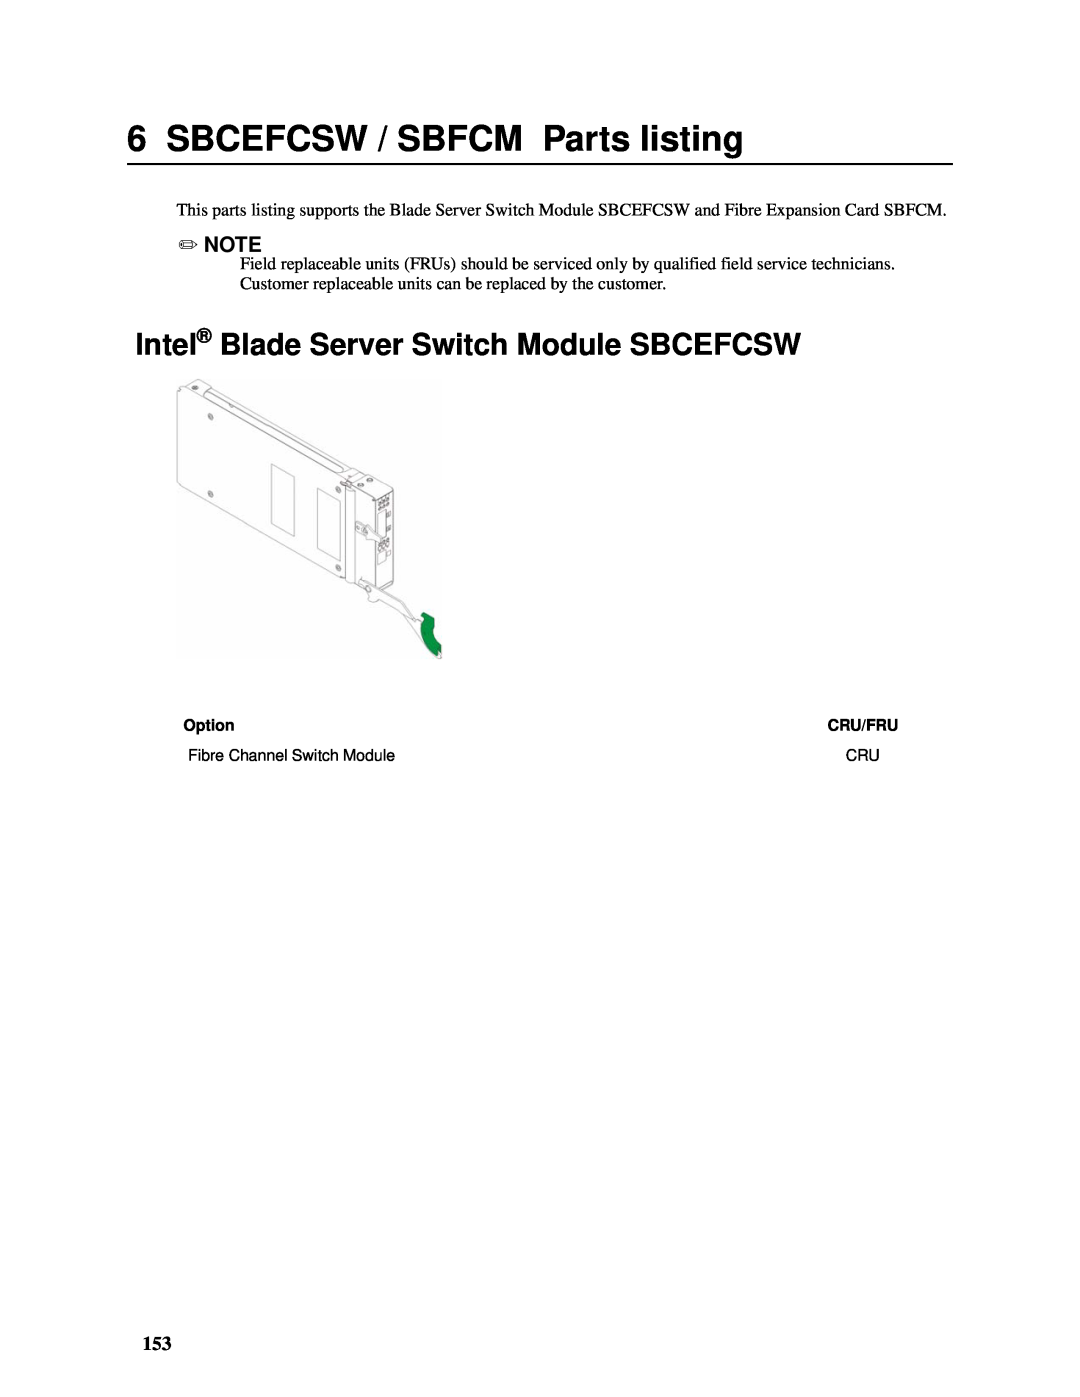 Intel manual SBCEFCSW / SBFCM Parts listing, Intel Blade Server Switch Module SBCEFCSW 